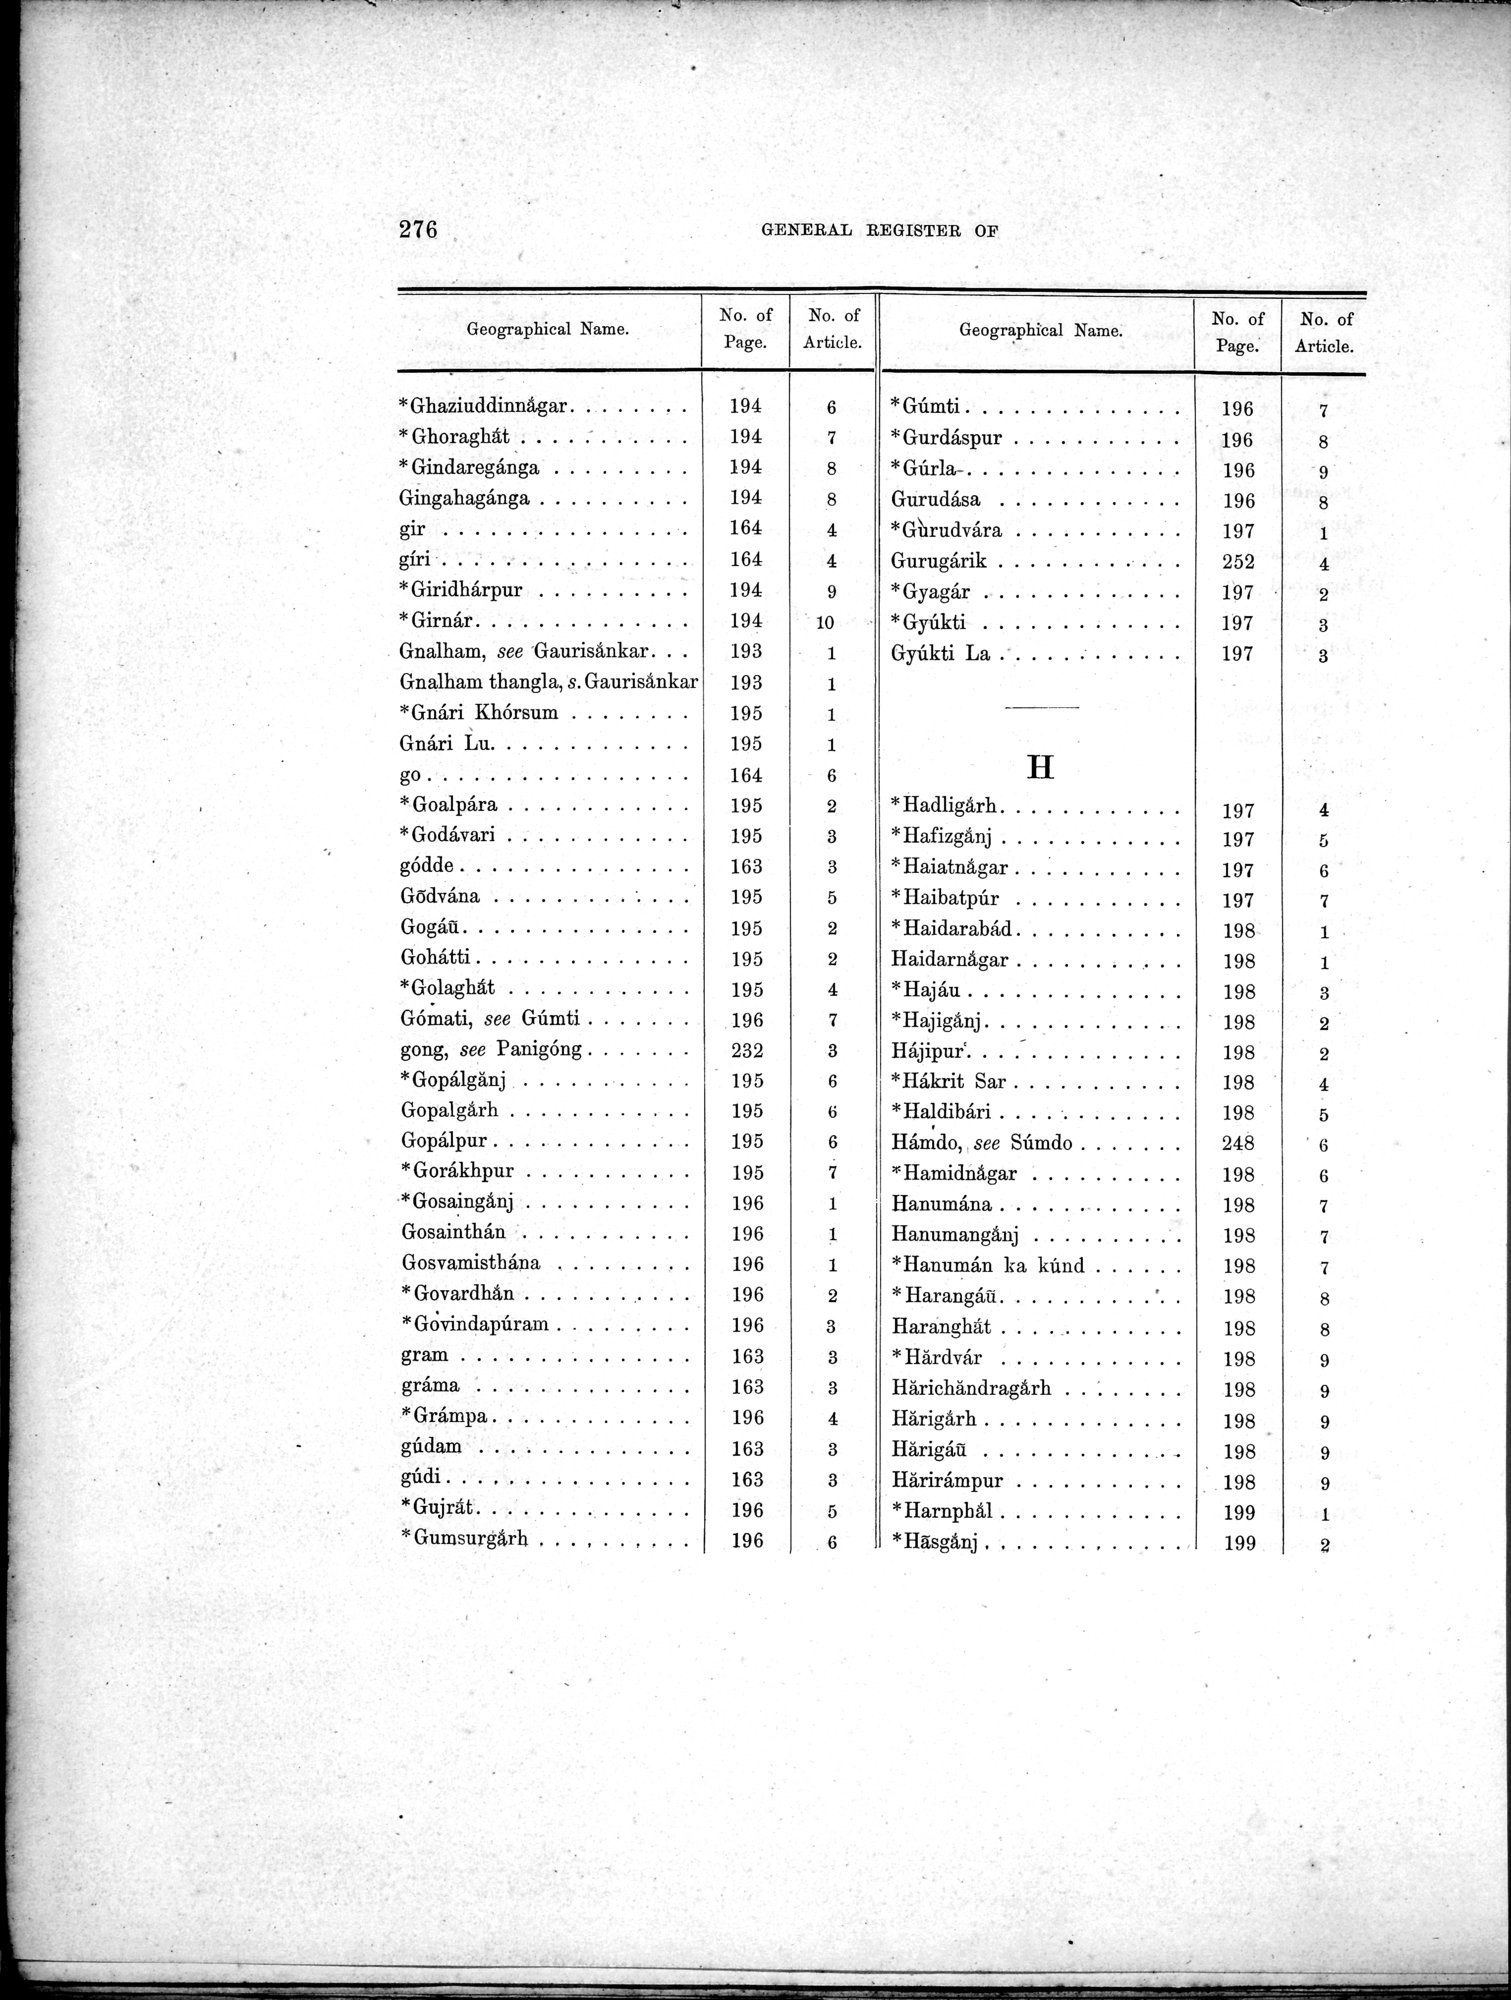 Results of a Scientific Mission to India and High Asia : vol.3 / Page 308 (Grayscale High Resolution Image)